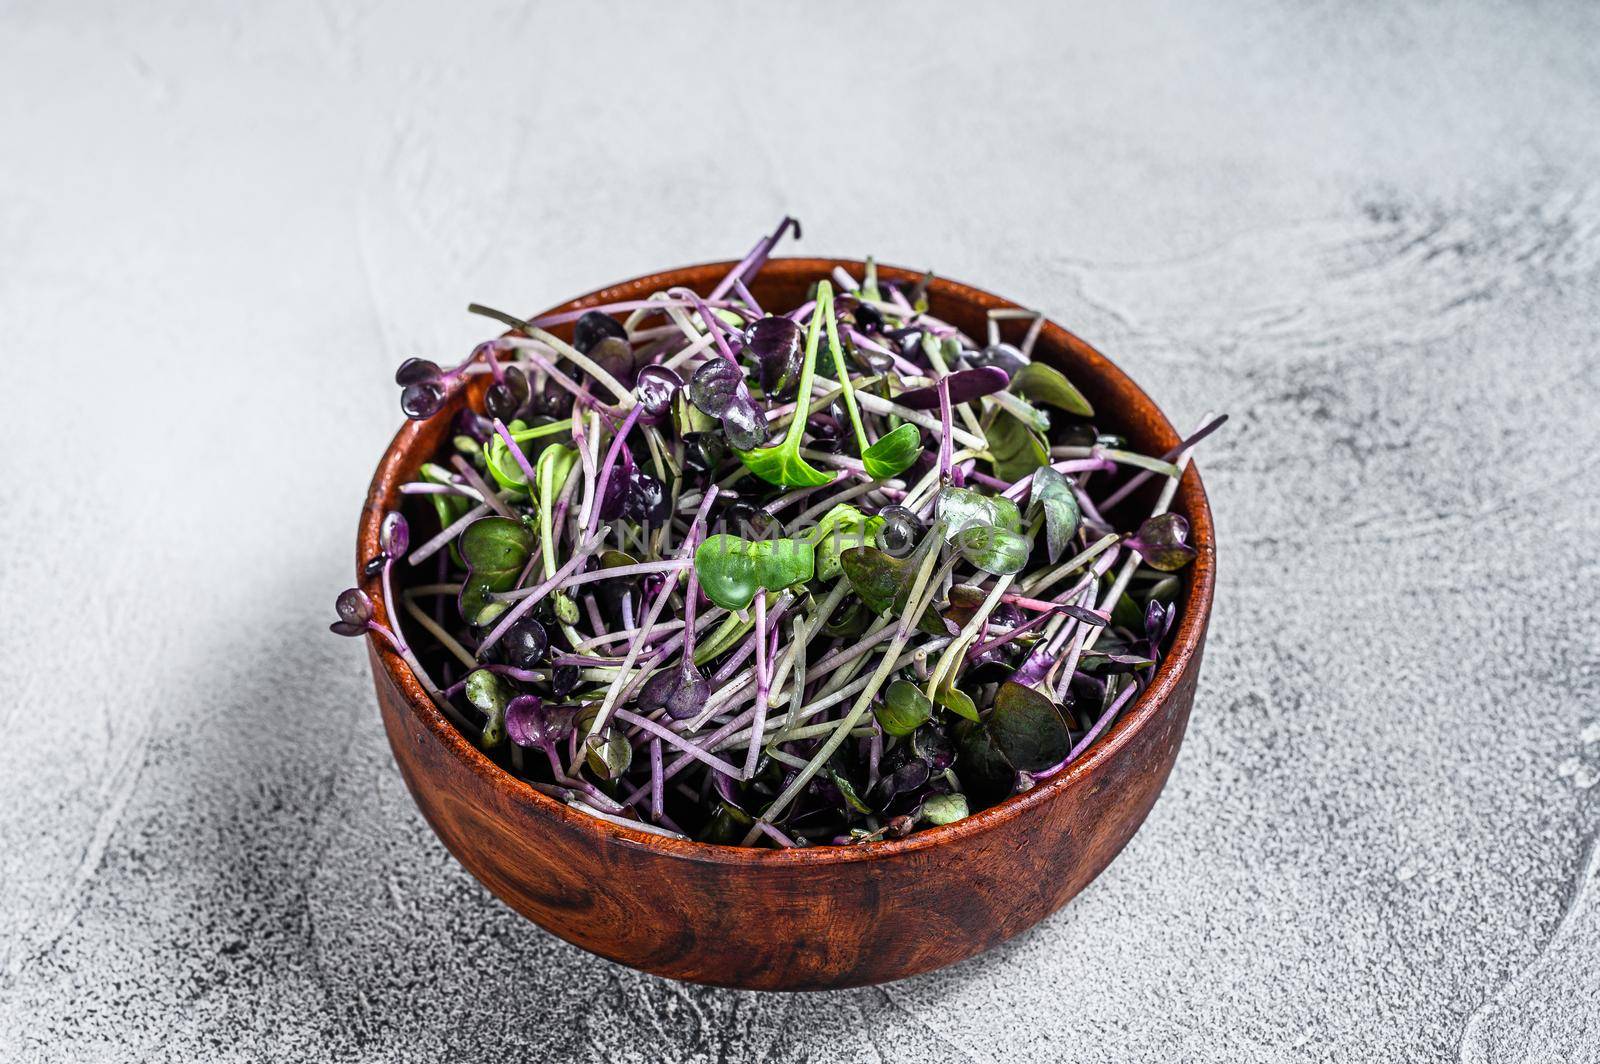 Microgreen radish cress sprouts in a wooden bowl. White background. Top view by Composter